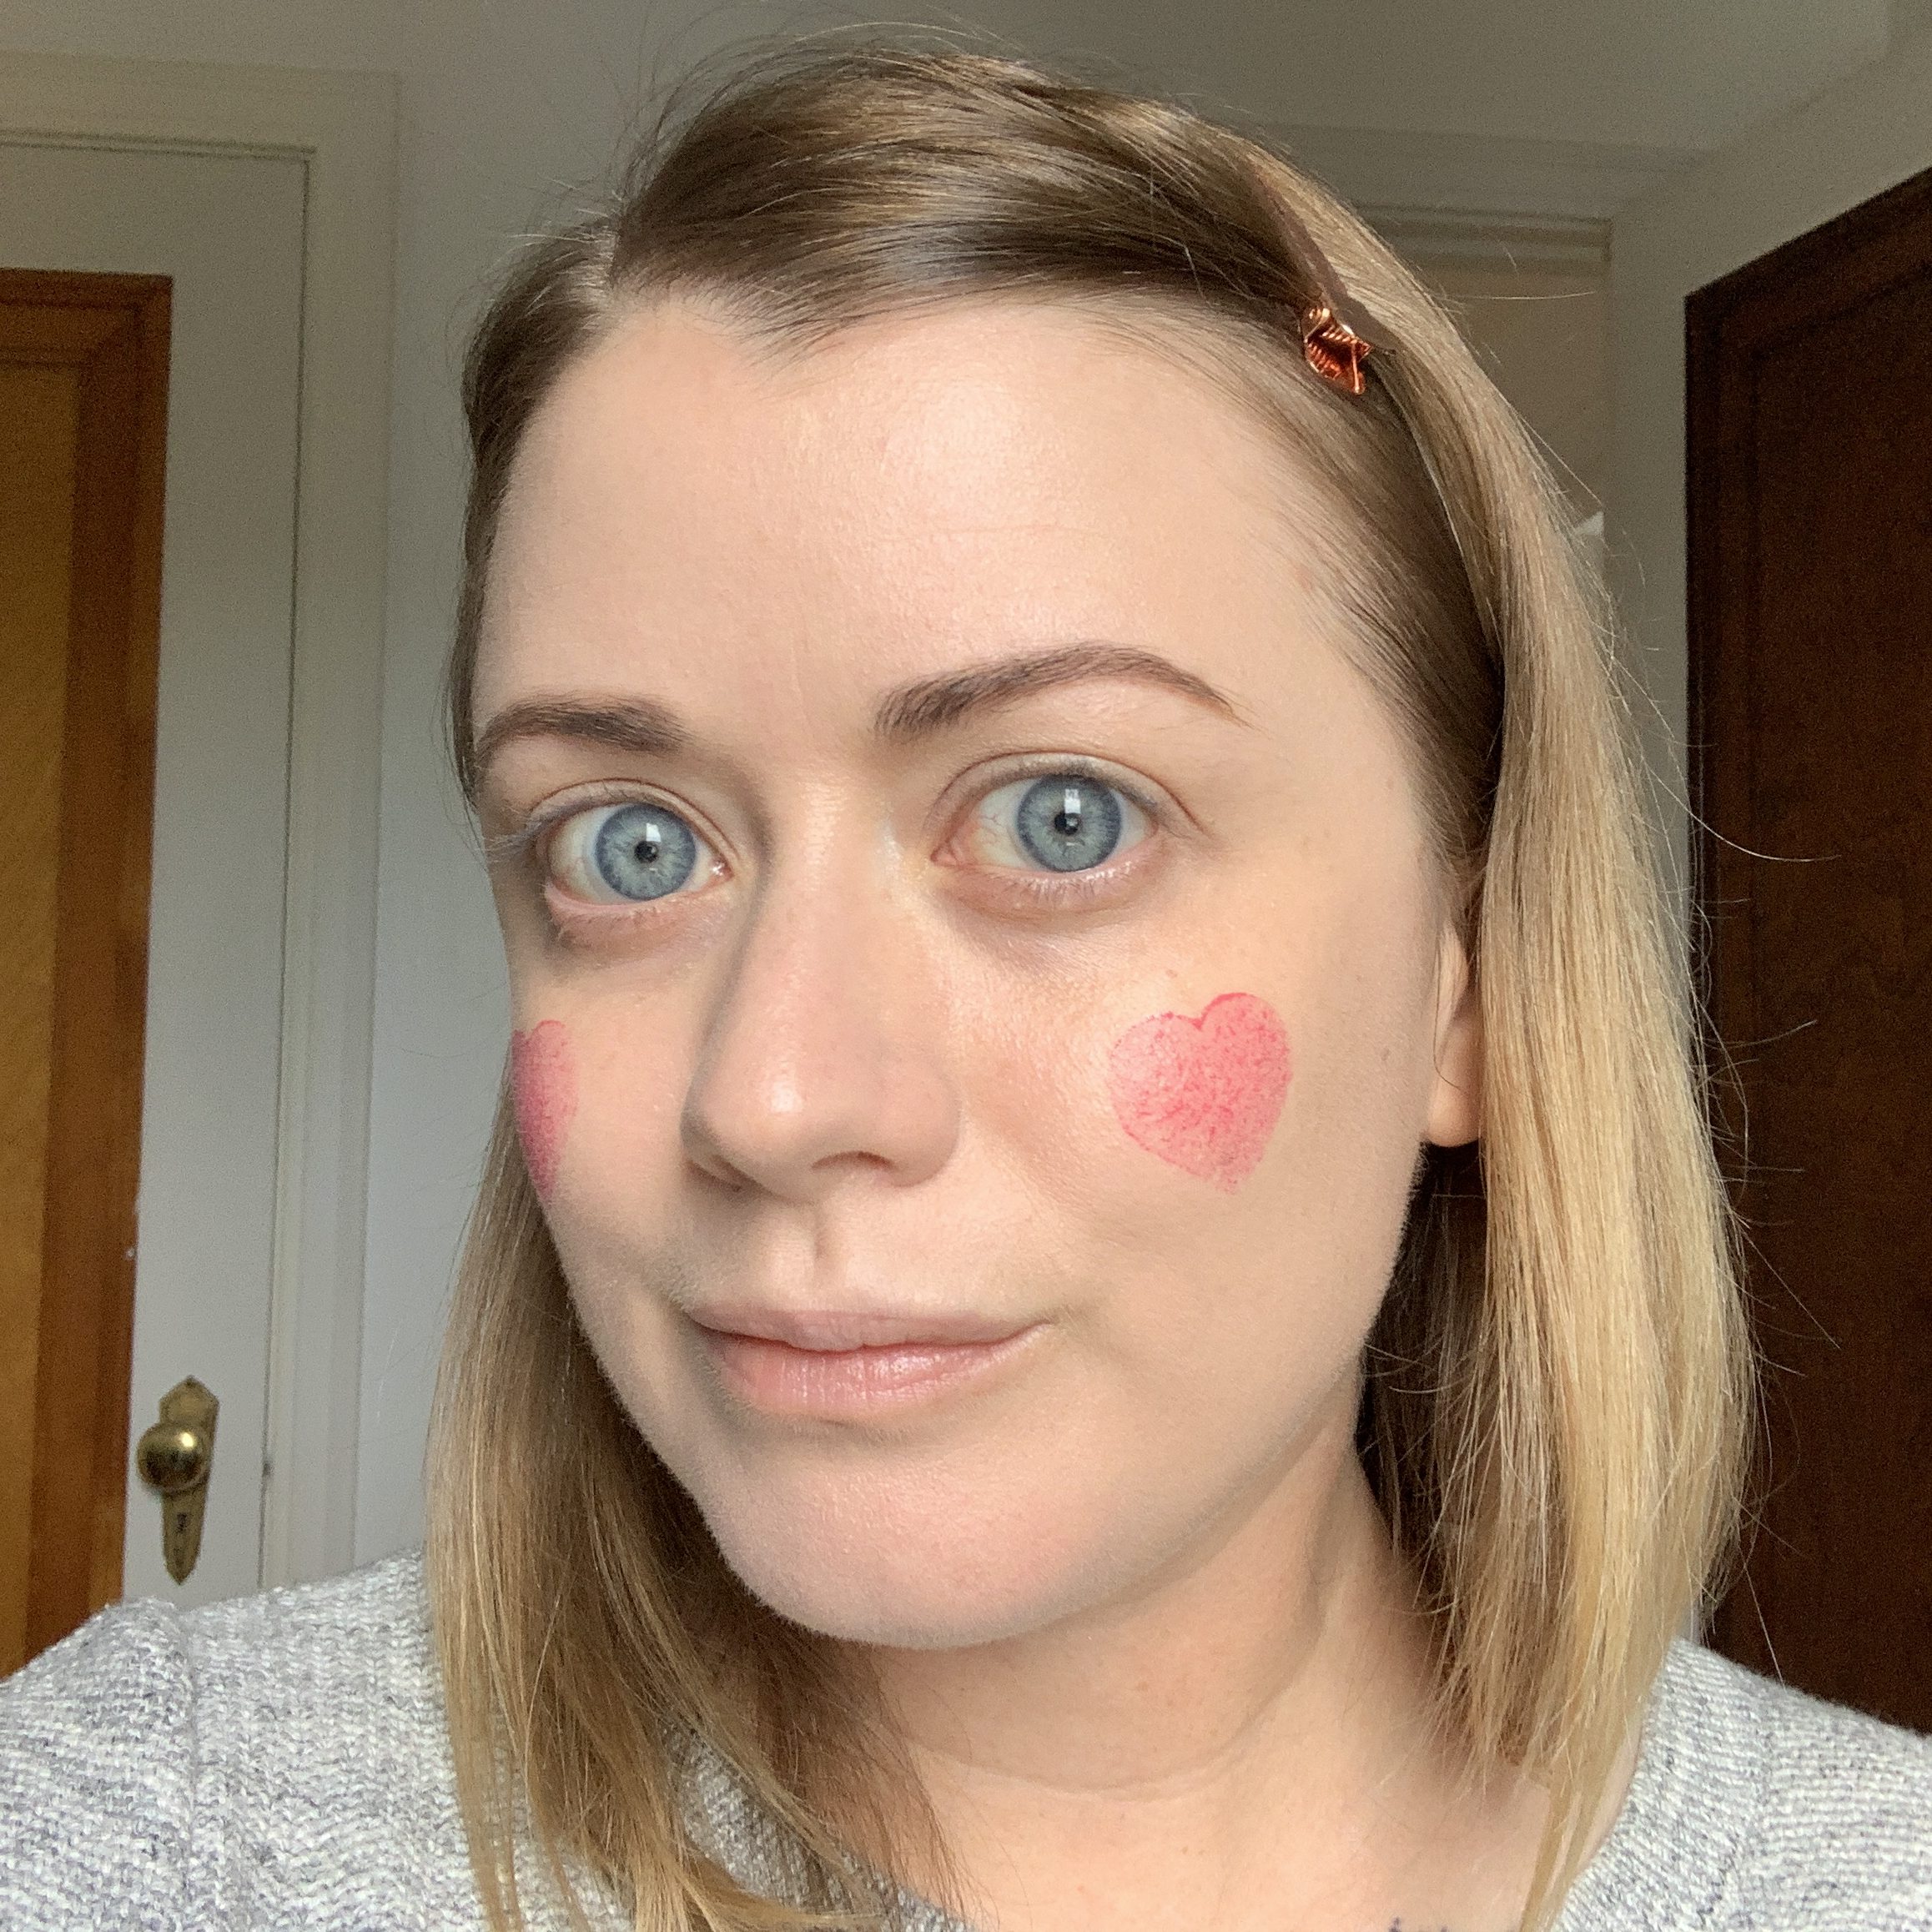 Marne with heart stamp blush on cheeks